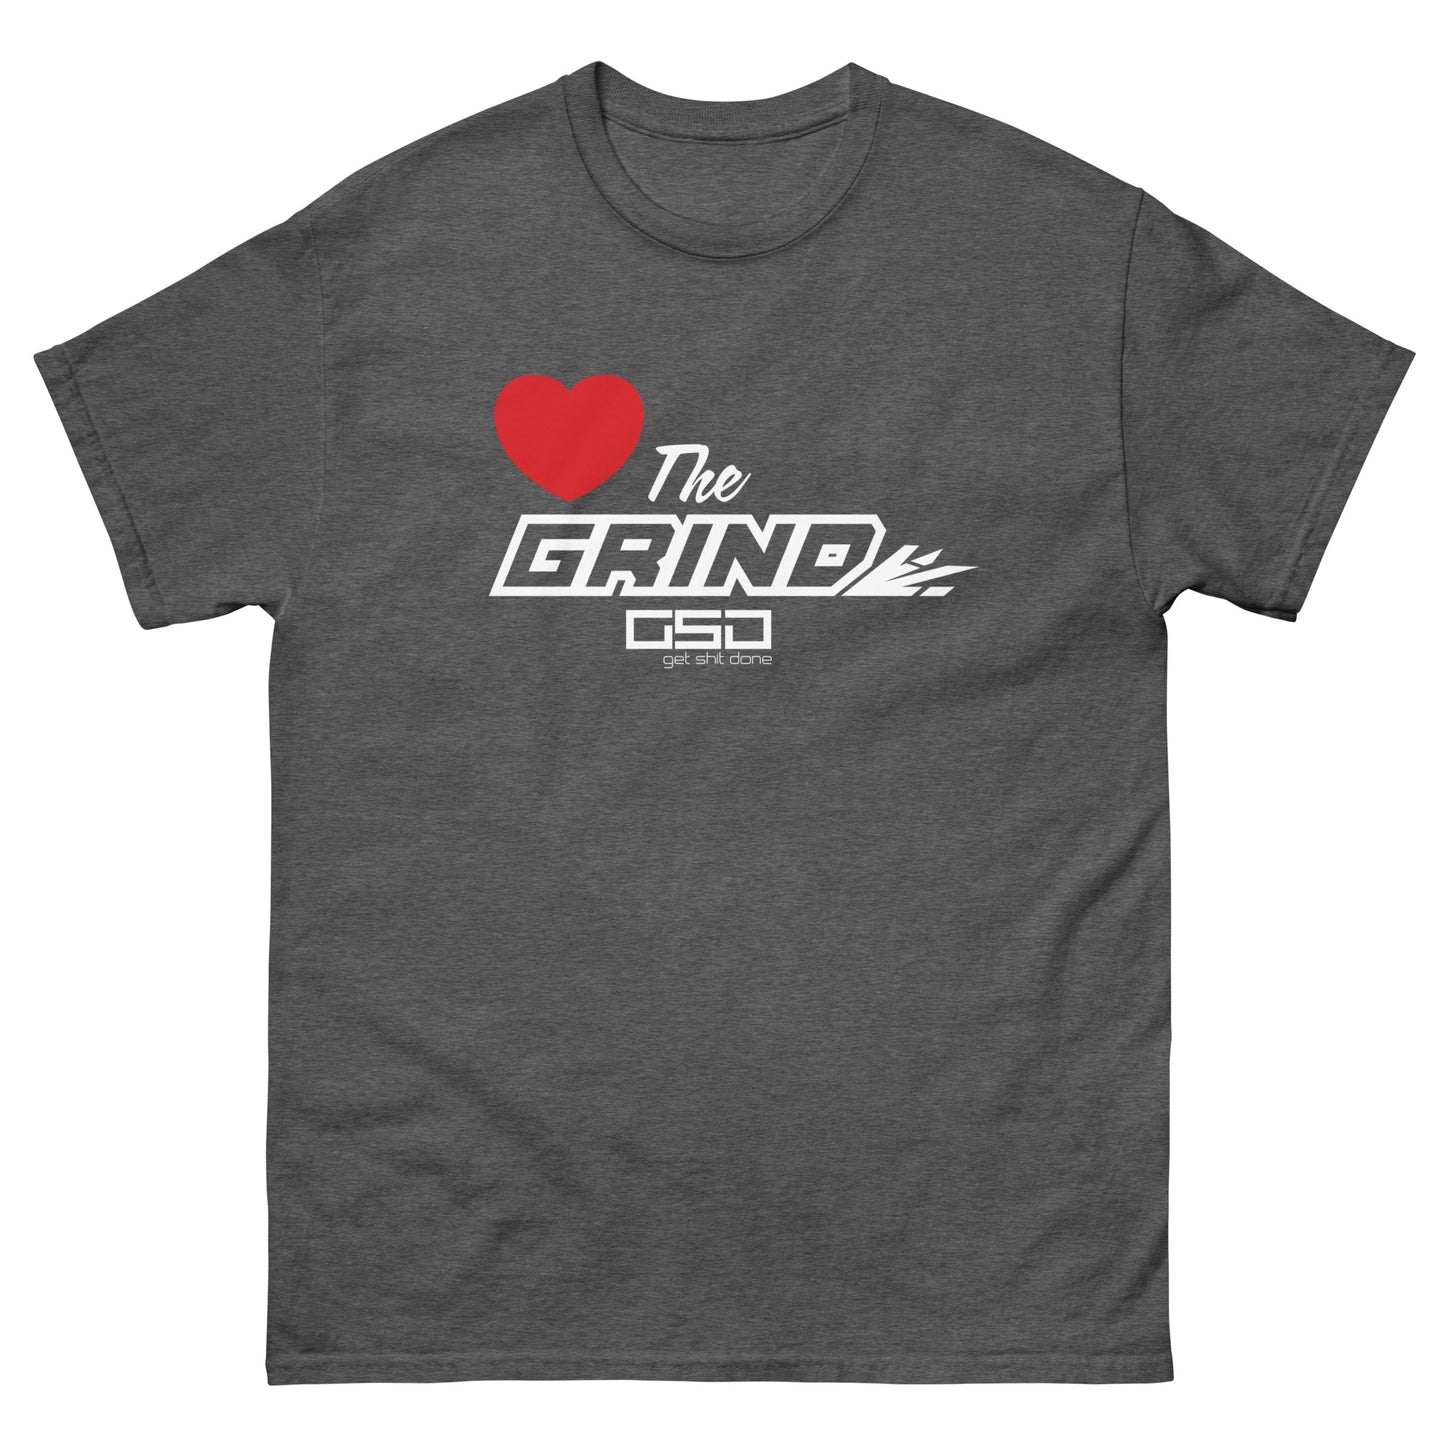 LOVE The Grind-Classic tee